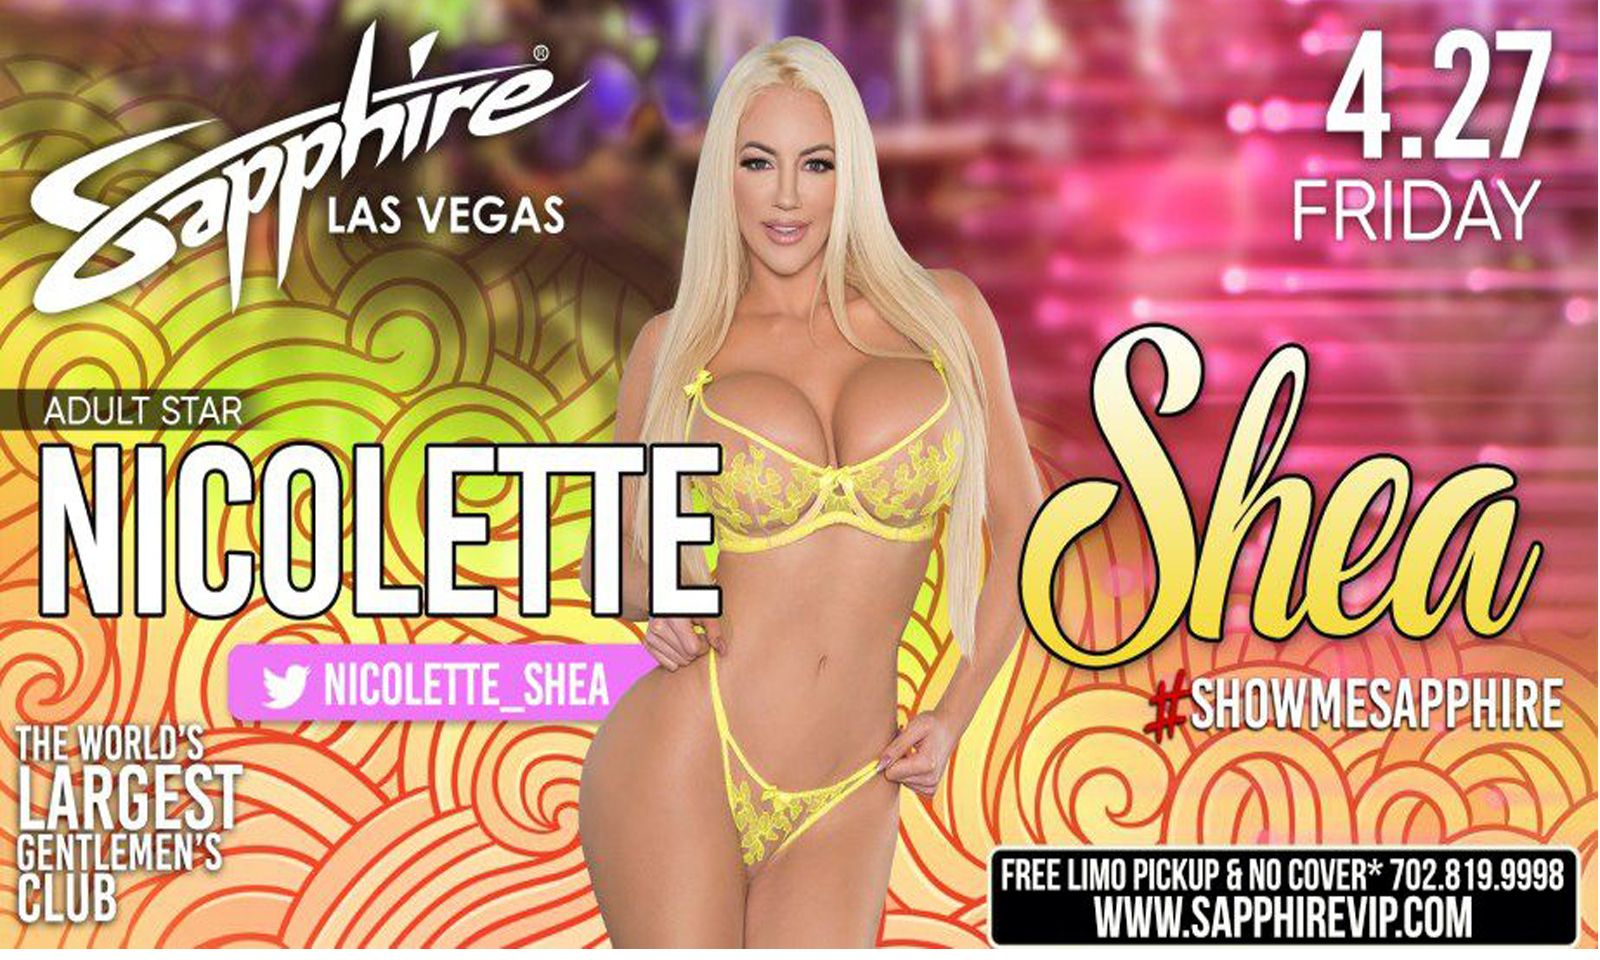 Nicolette Shea Heads to Sin City to Headline at Sapphire